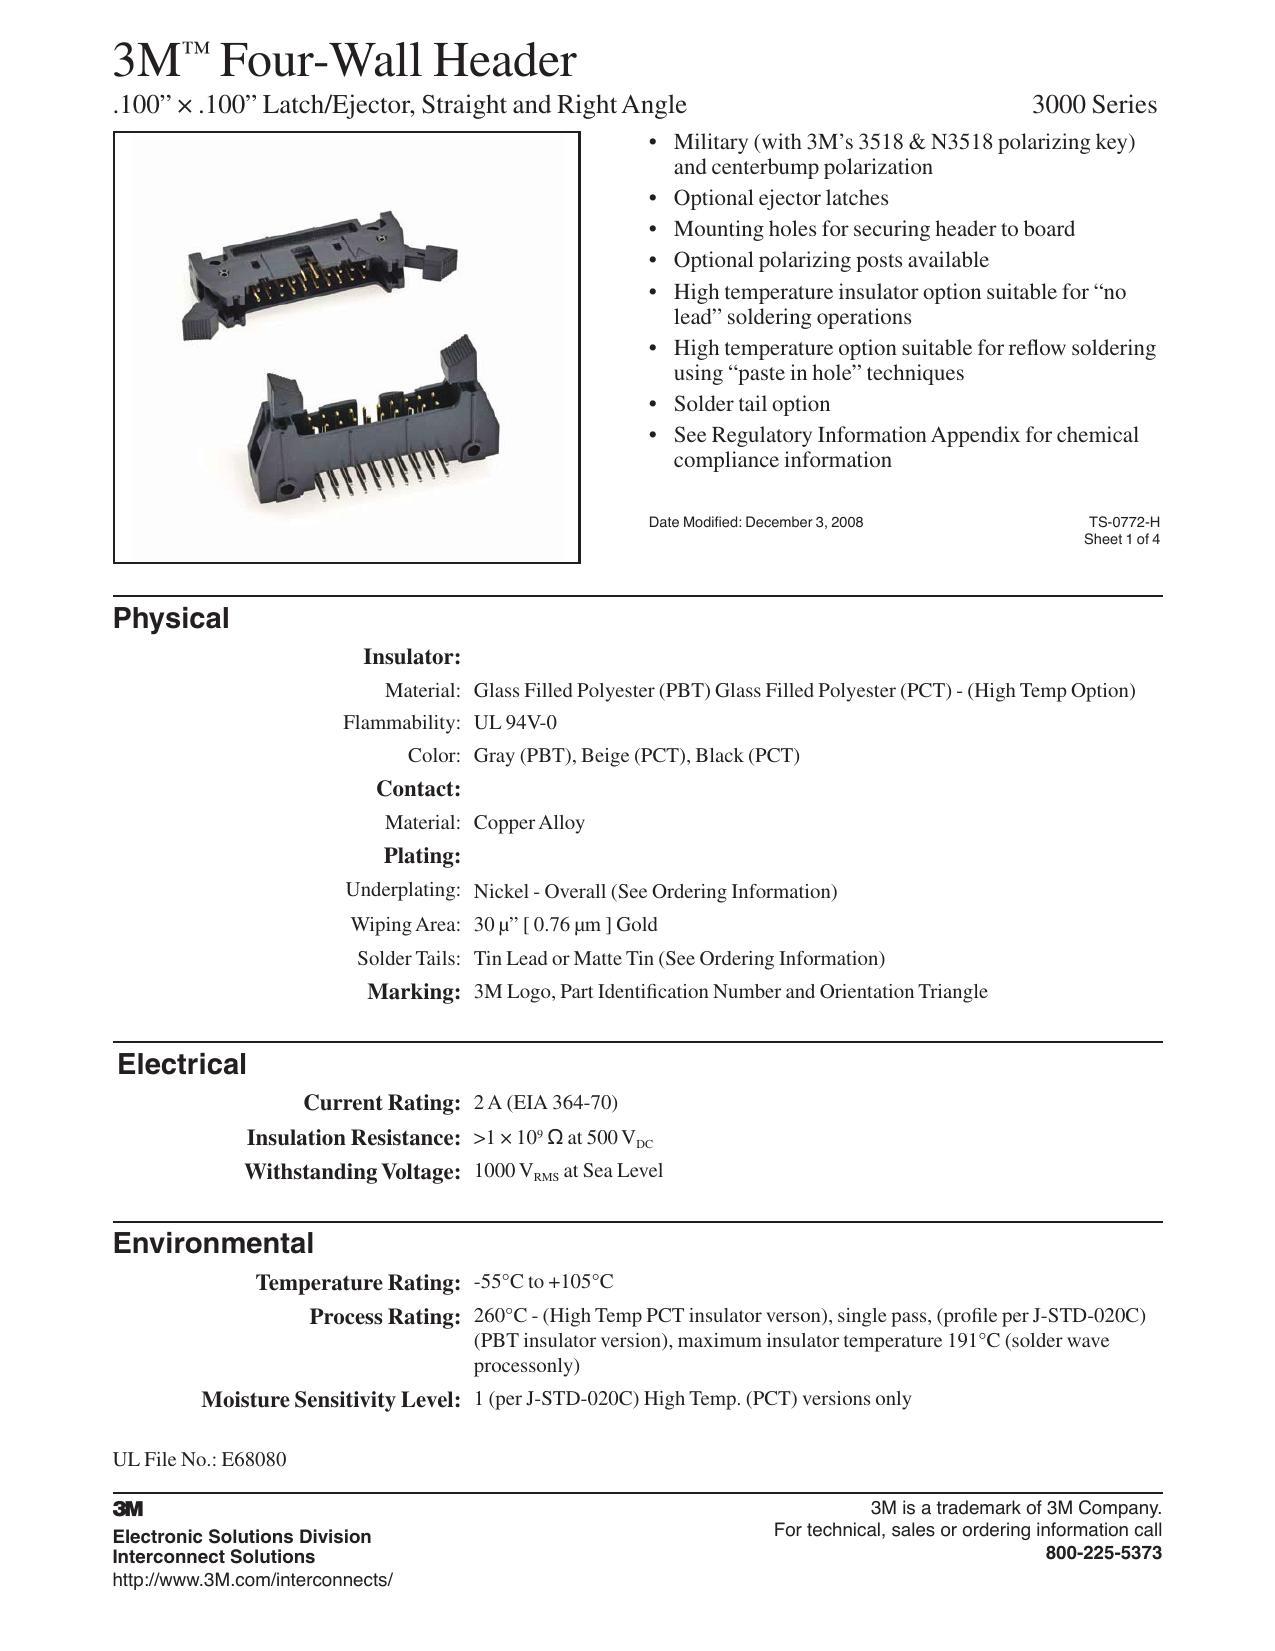 3m-tm-four-wall-header-100-x-100-latchejector-straight-and-right-angle-3000-series.pdf